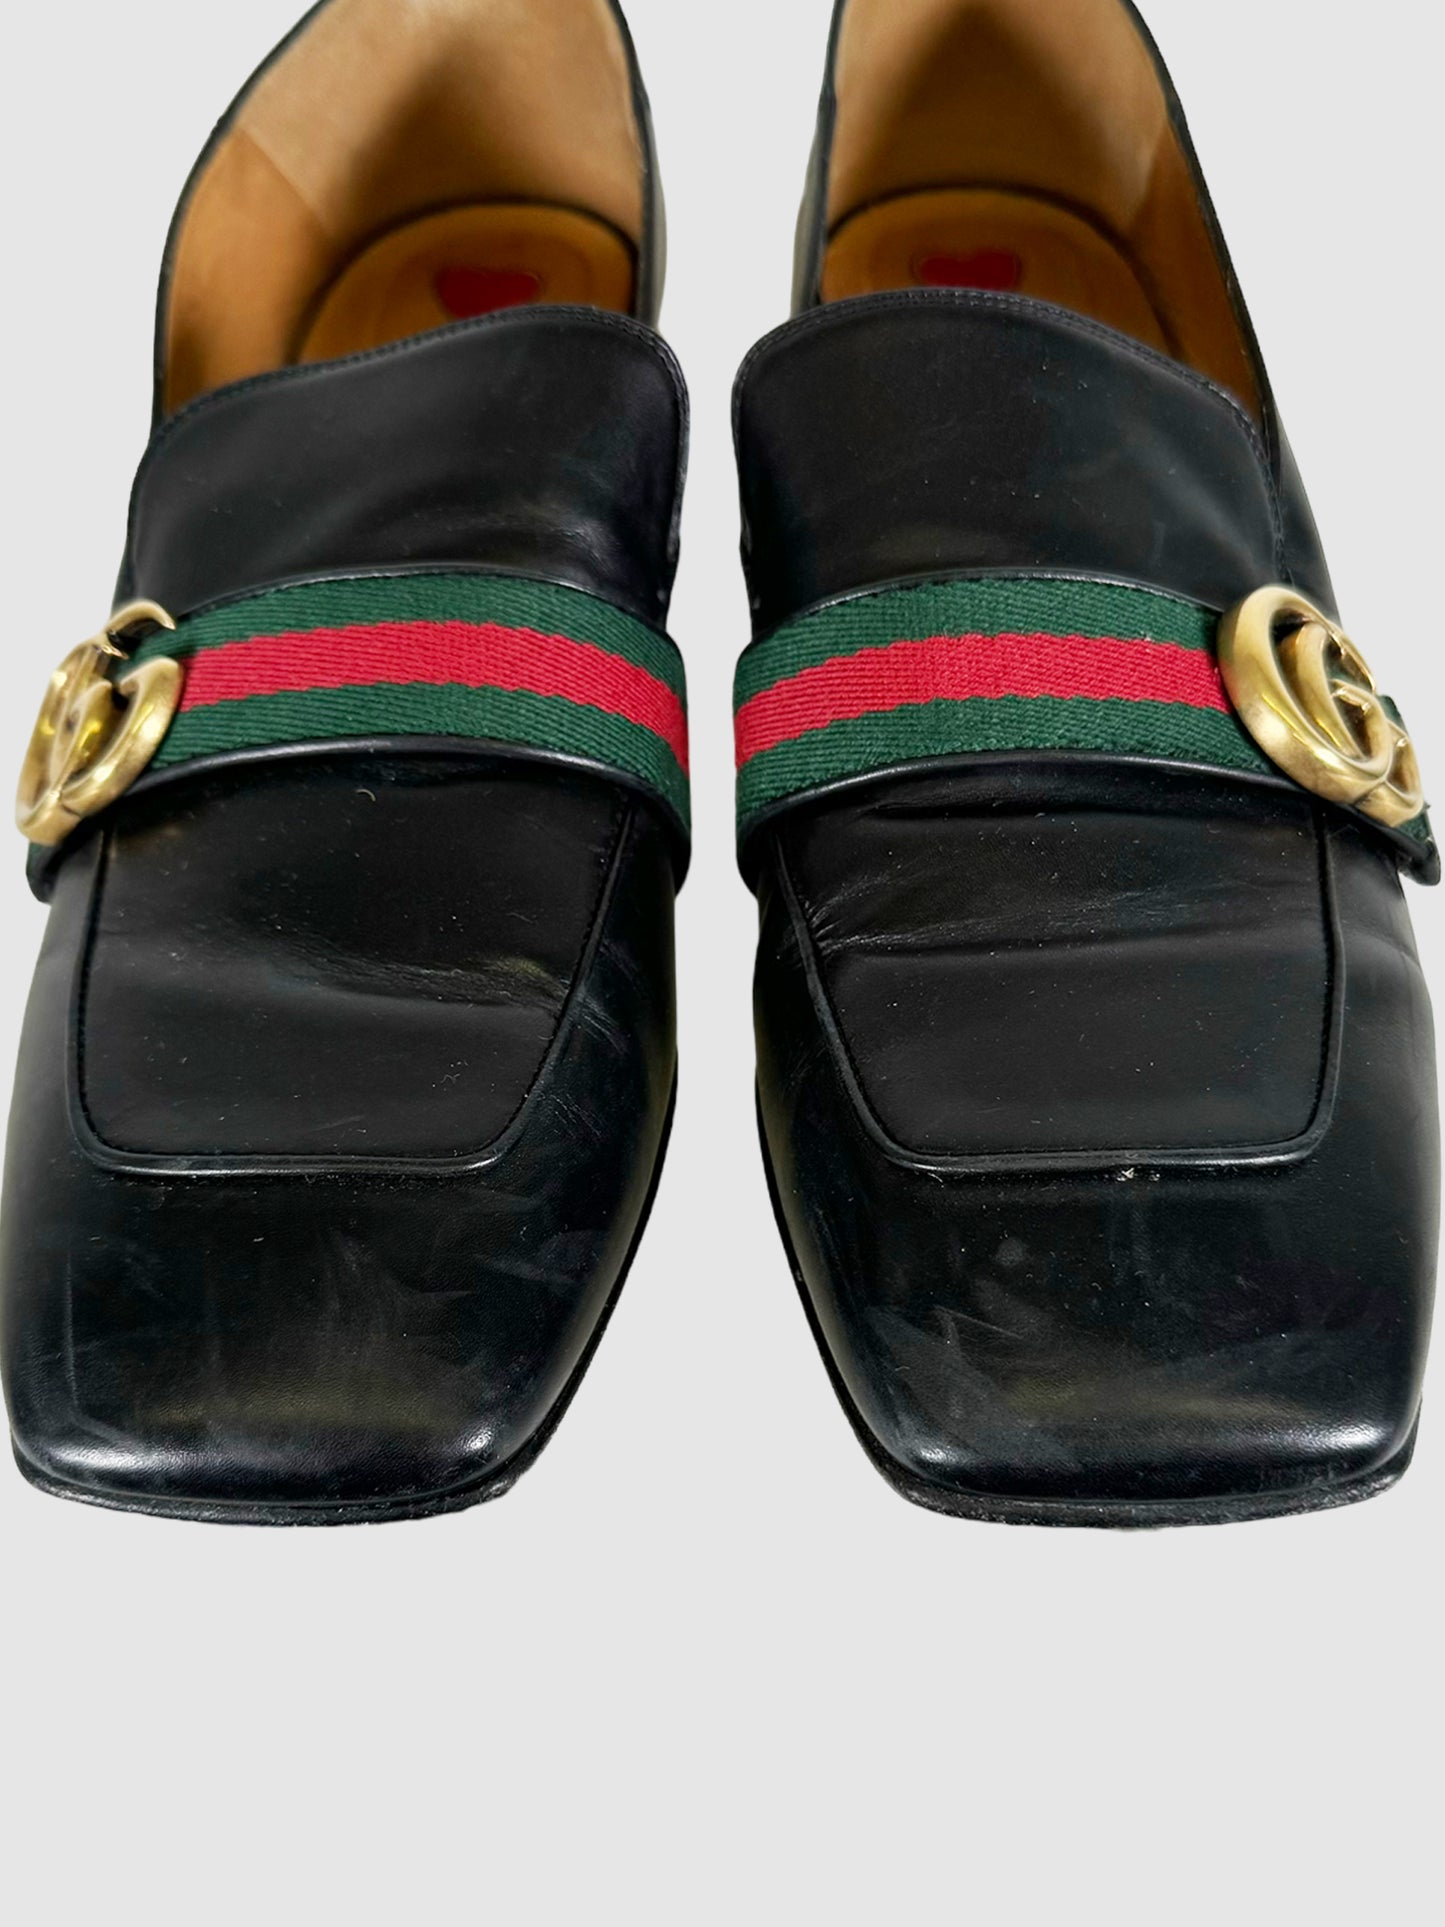 Double G Leather Loafers with Stripes - Size 42